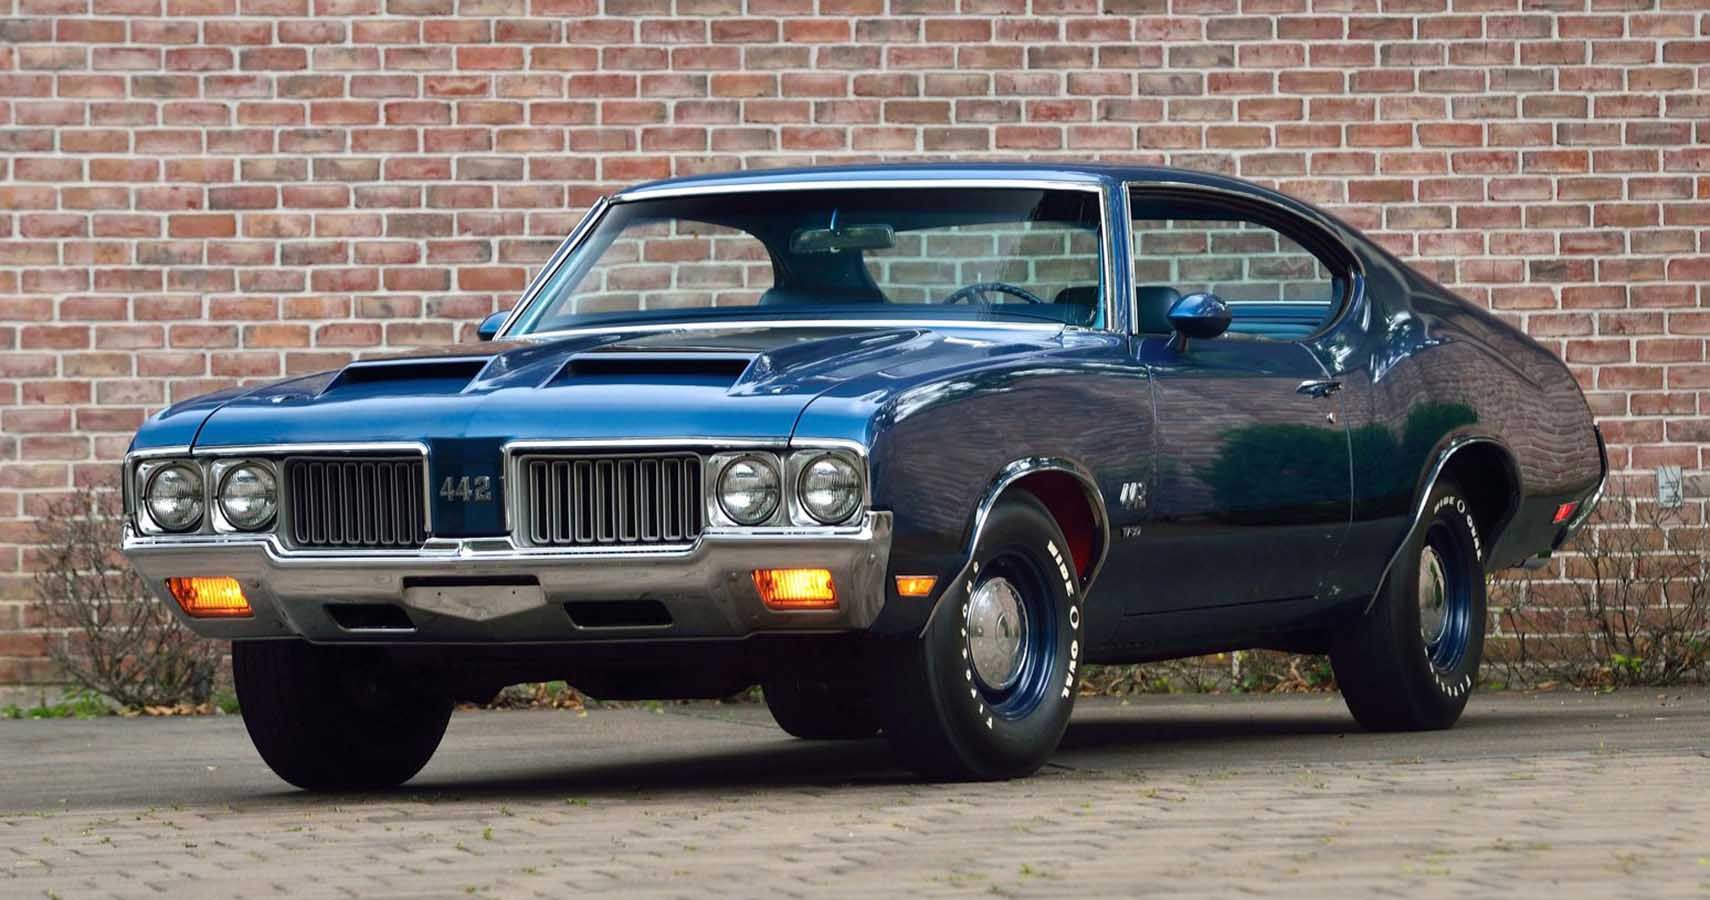 Ranking The Most Powerful Classic Muscle Cars Released In The '70s